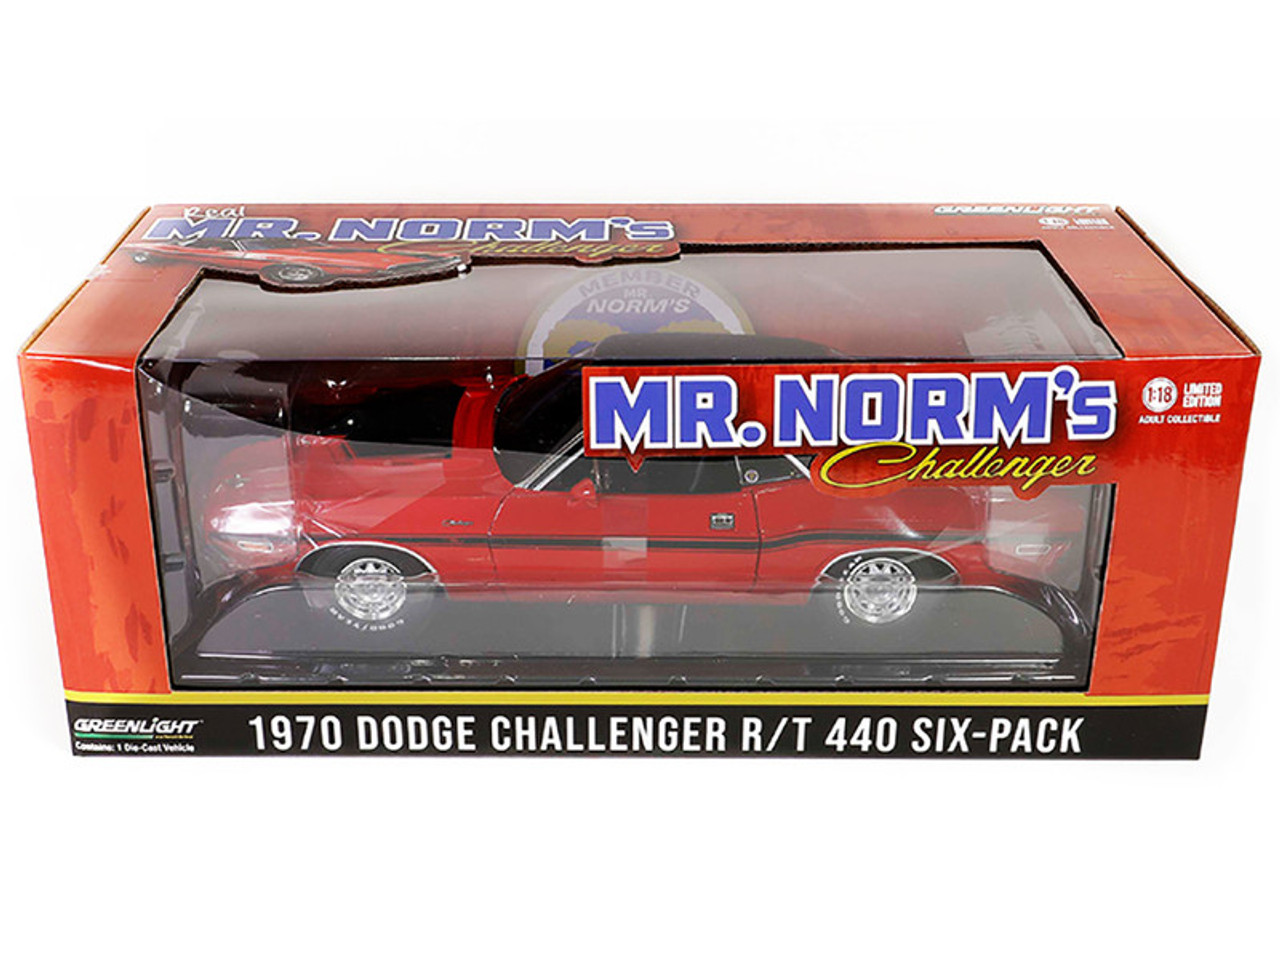 1970 Dodge Challenger R/T 440 Six-Pack - Mr. Norm's Grand Spaulding Dodge - Red with Black Interior - 1:18 Diecast Model by Greenlight